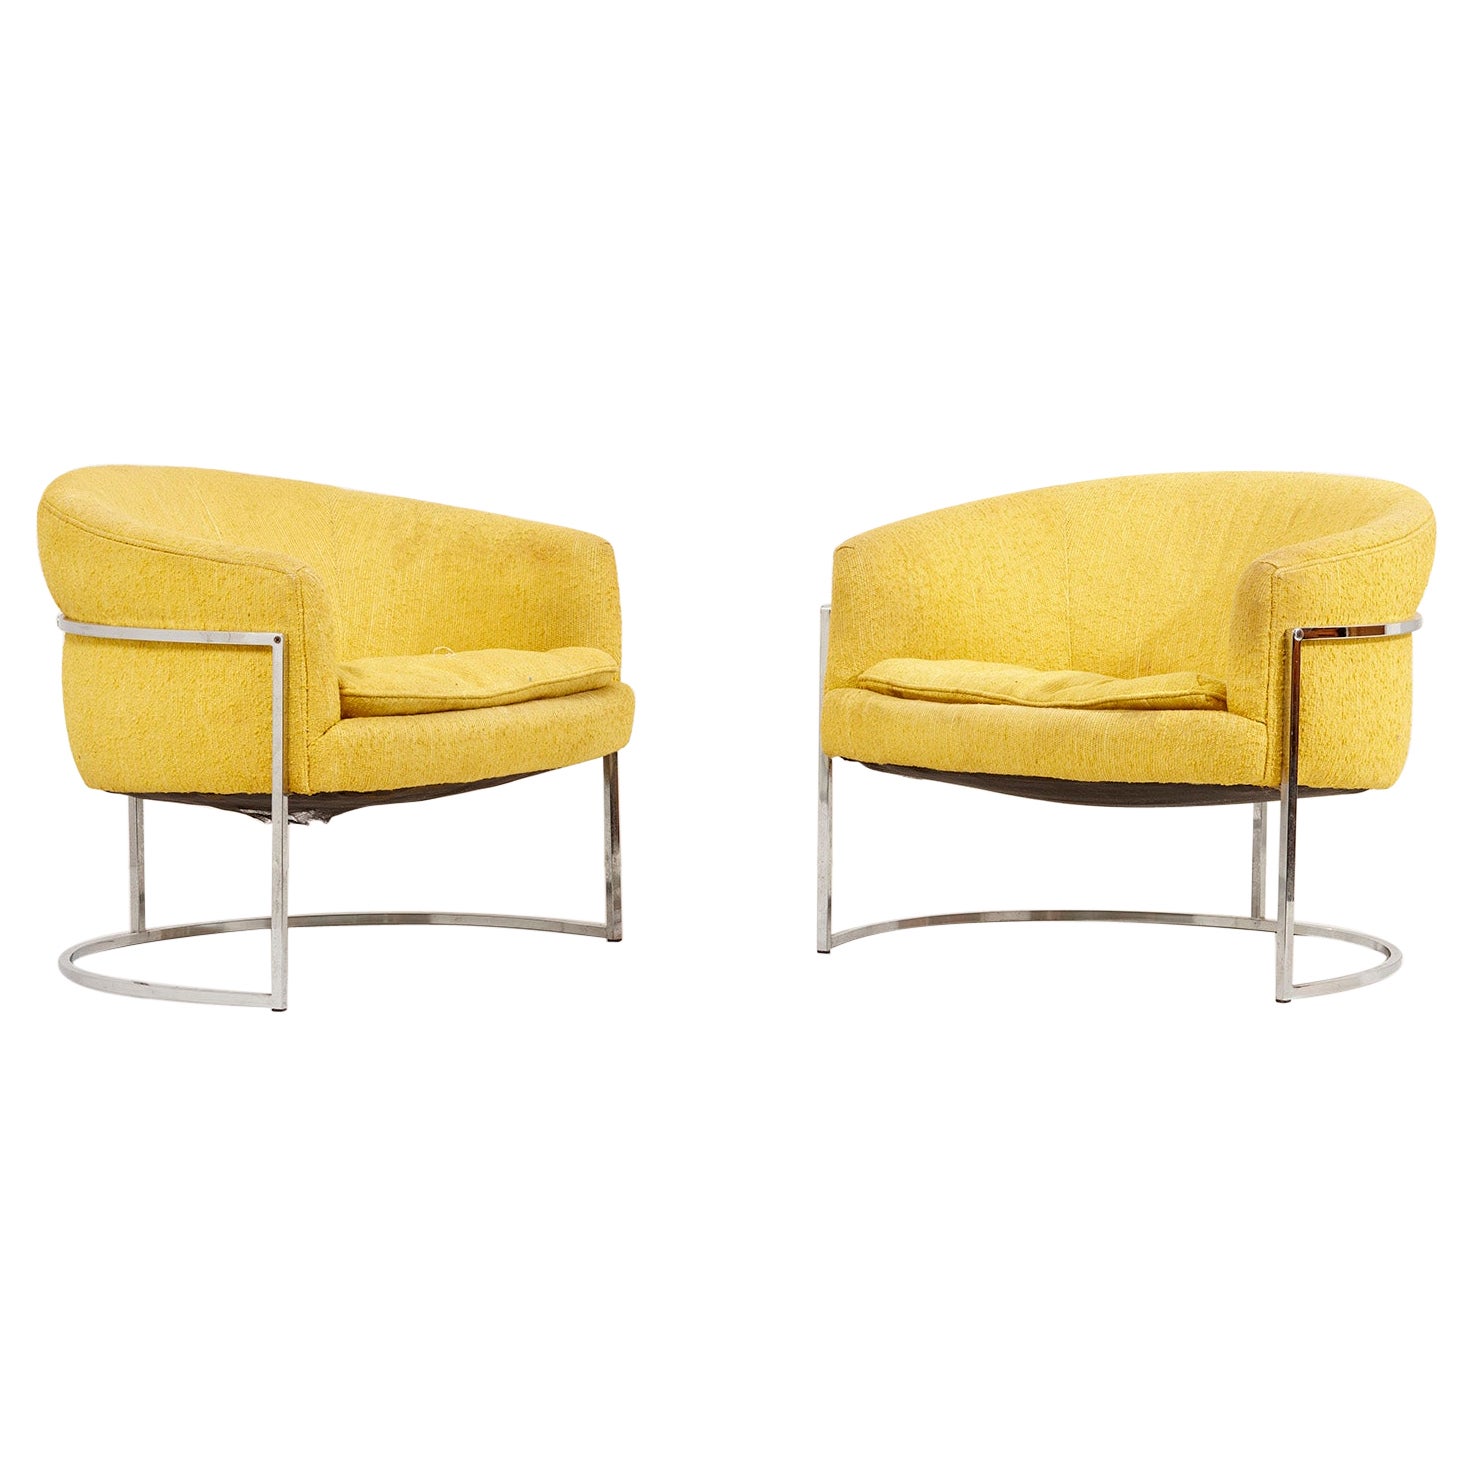 Pair of yellow Bernhadt Lounge Chairs, USA, 1960s For Sale